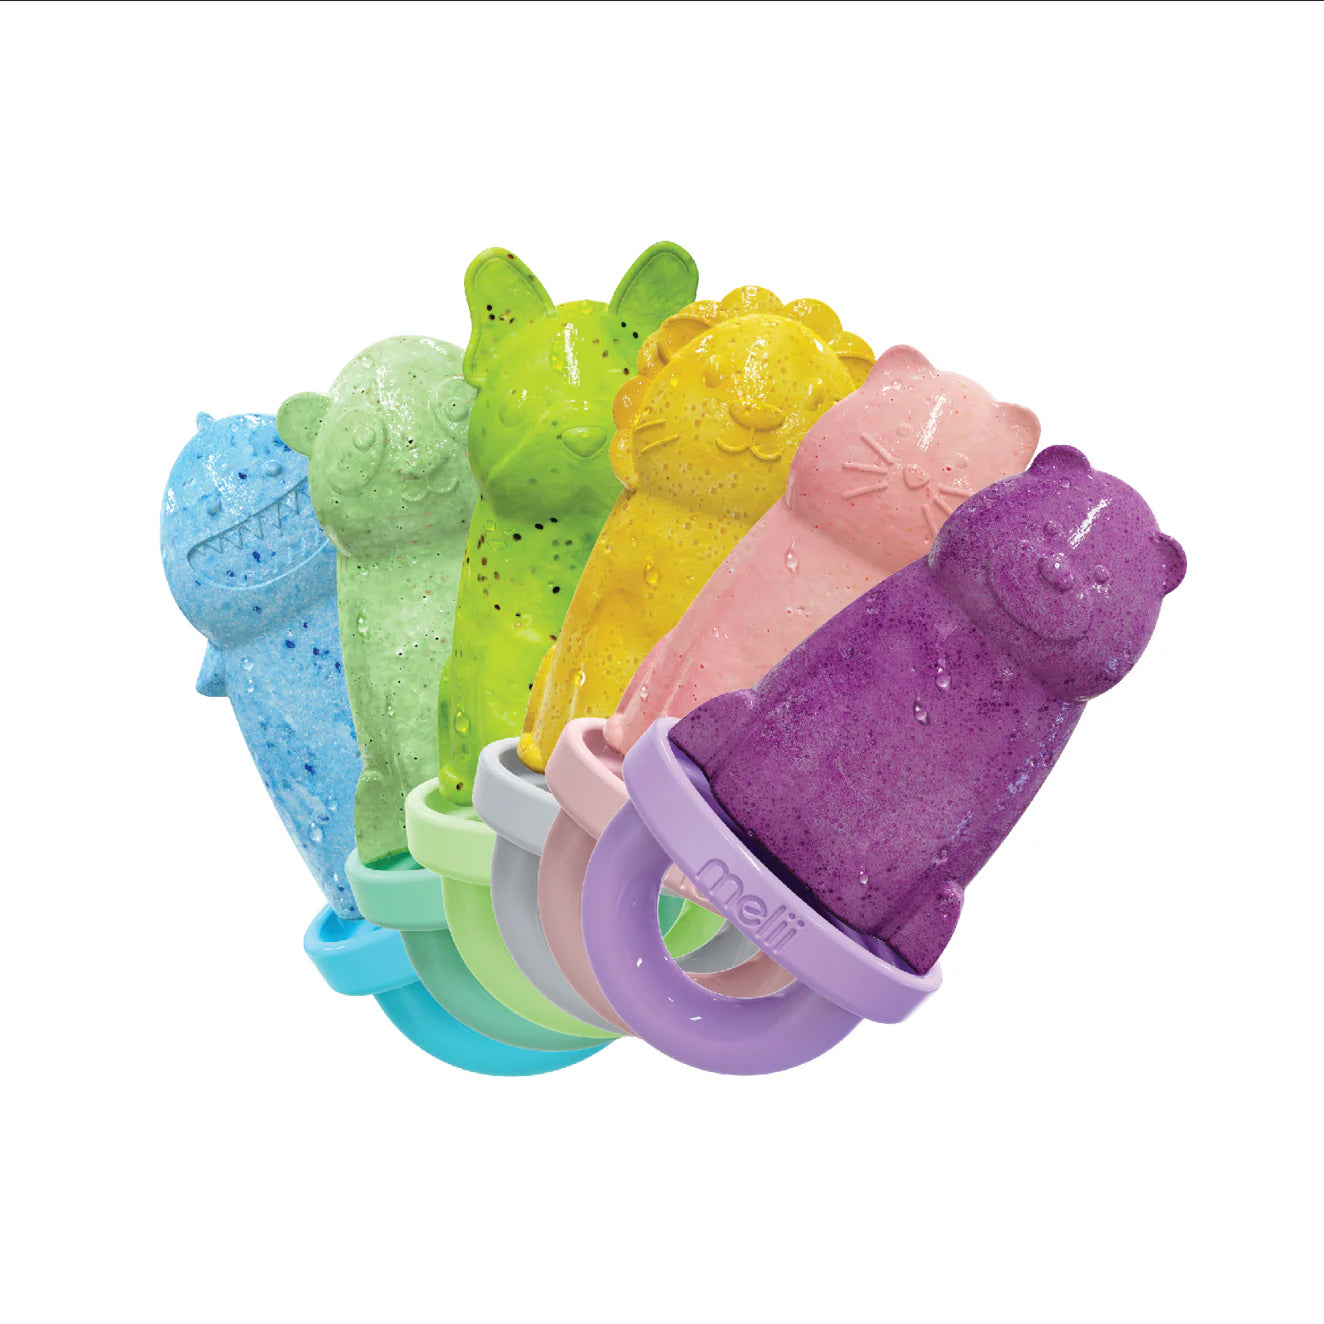 melii Animal Shaped Popsicle Molds - Fun & Unique Silicone Ice Pop Maker with Drip Guard Handle - Ideal Size for Kids - BPA Free, Teething Relief, Dishwasher Safe